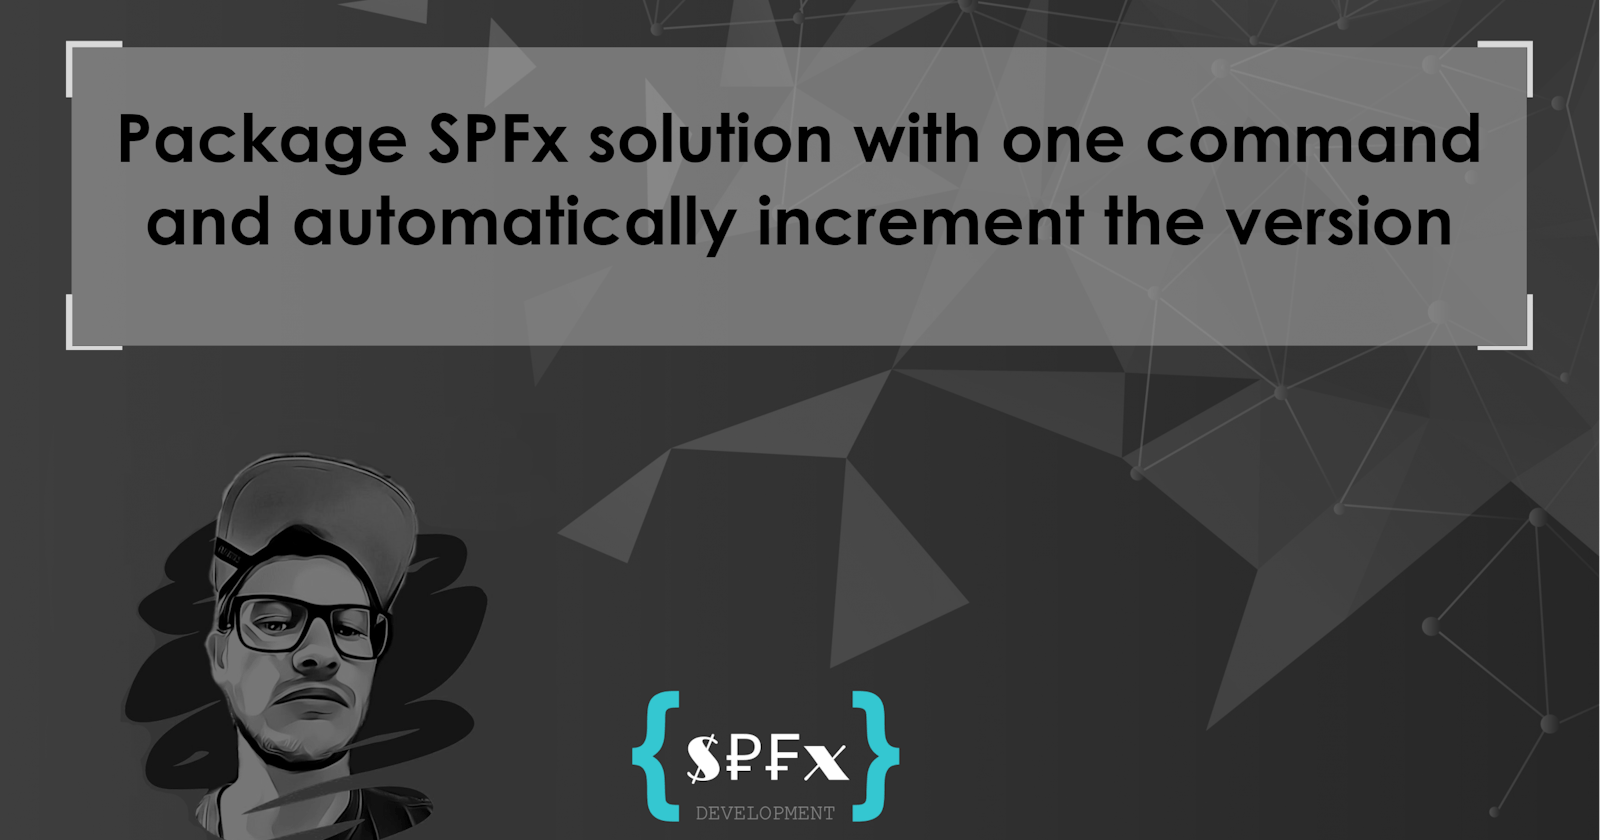 Package SPFx solution with one command and automatically increase the version